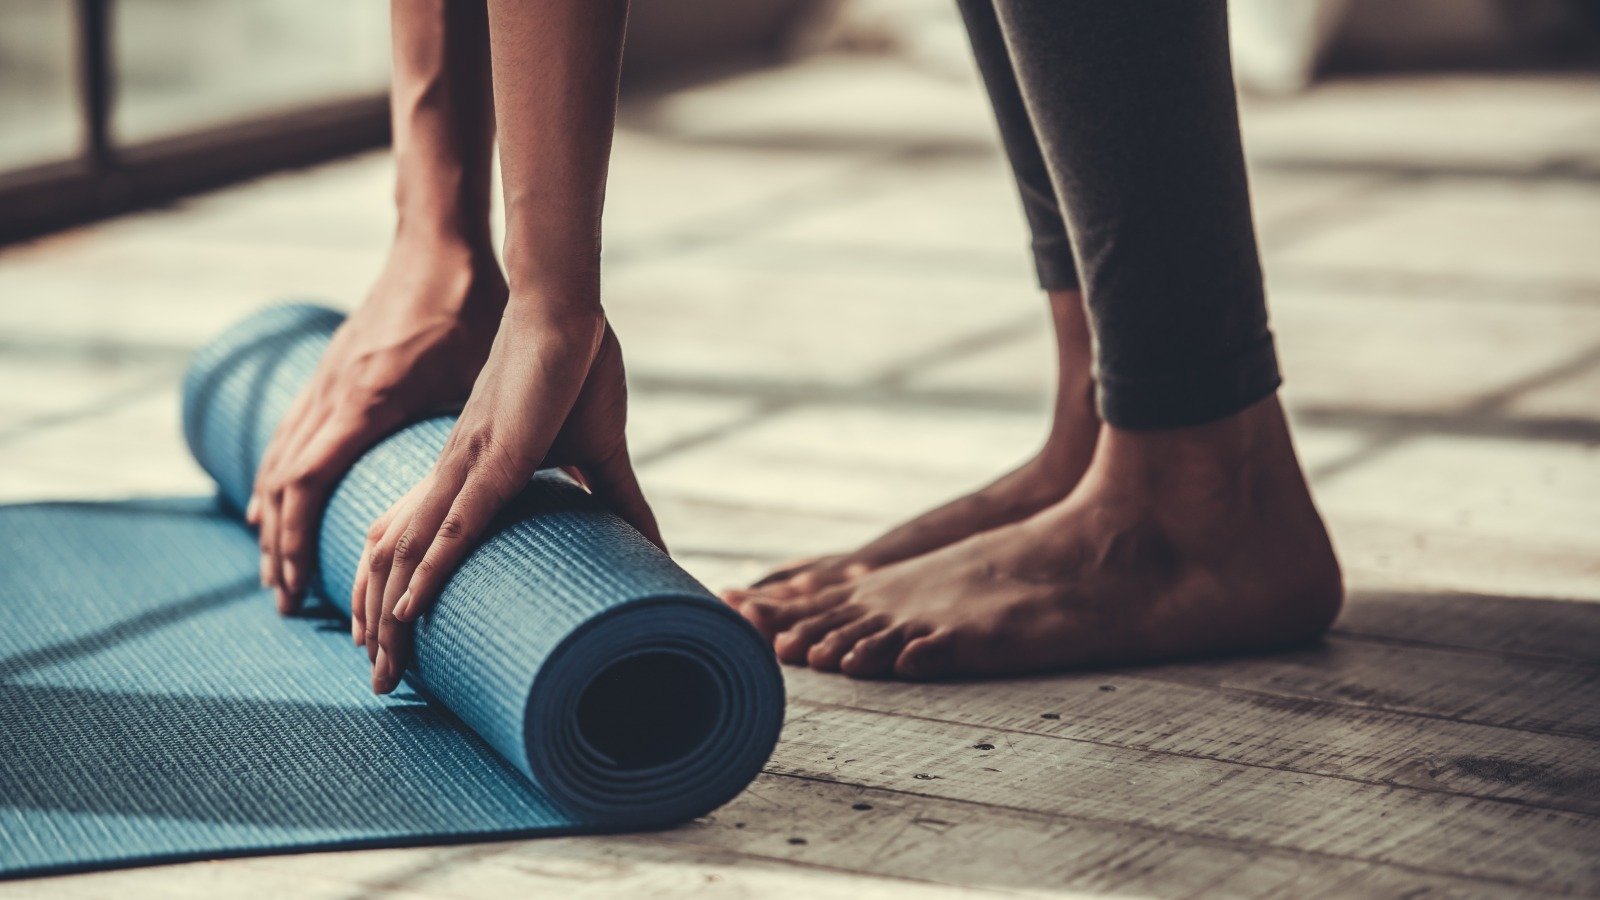 Yoga Vs Pilates: Which One Is Better For You?